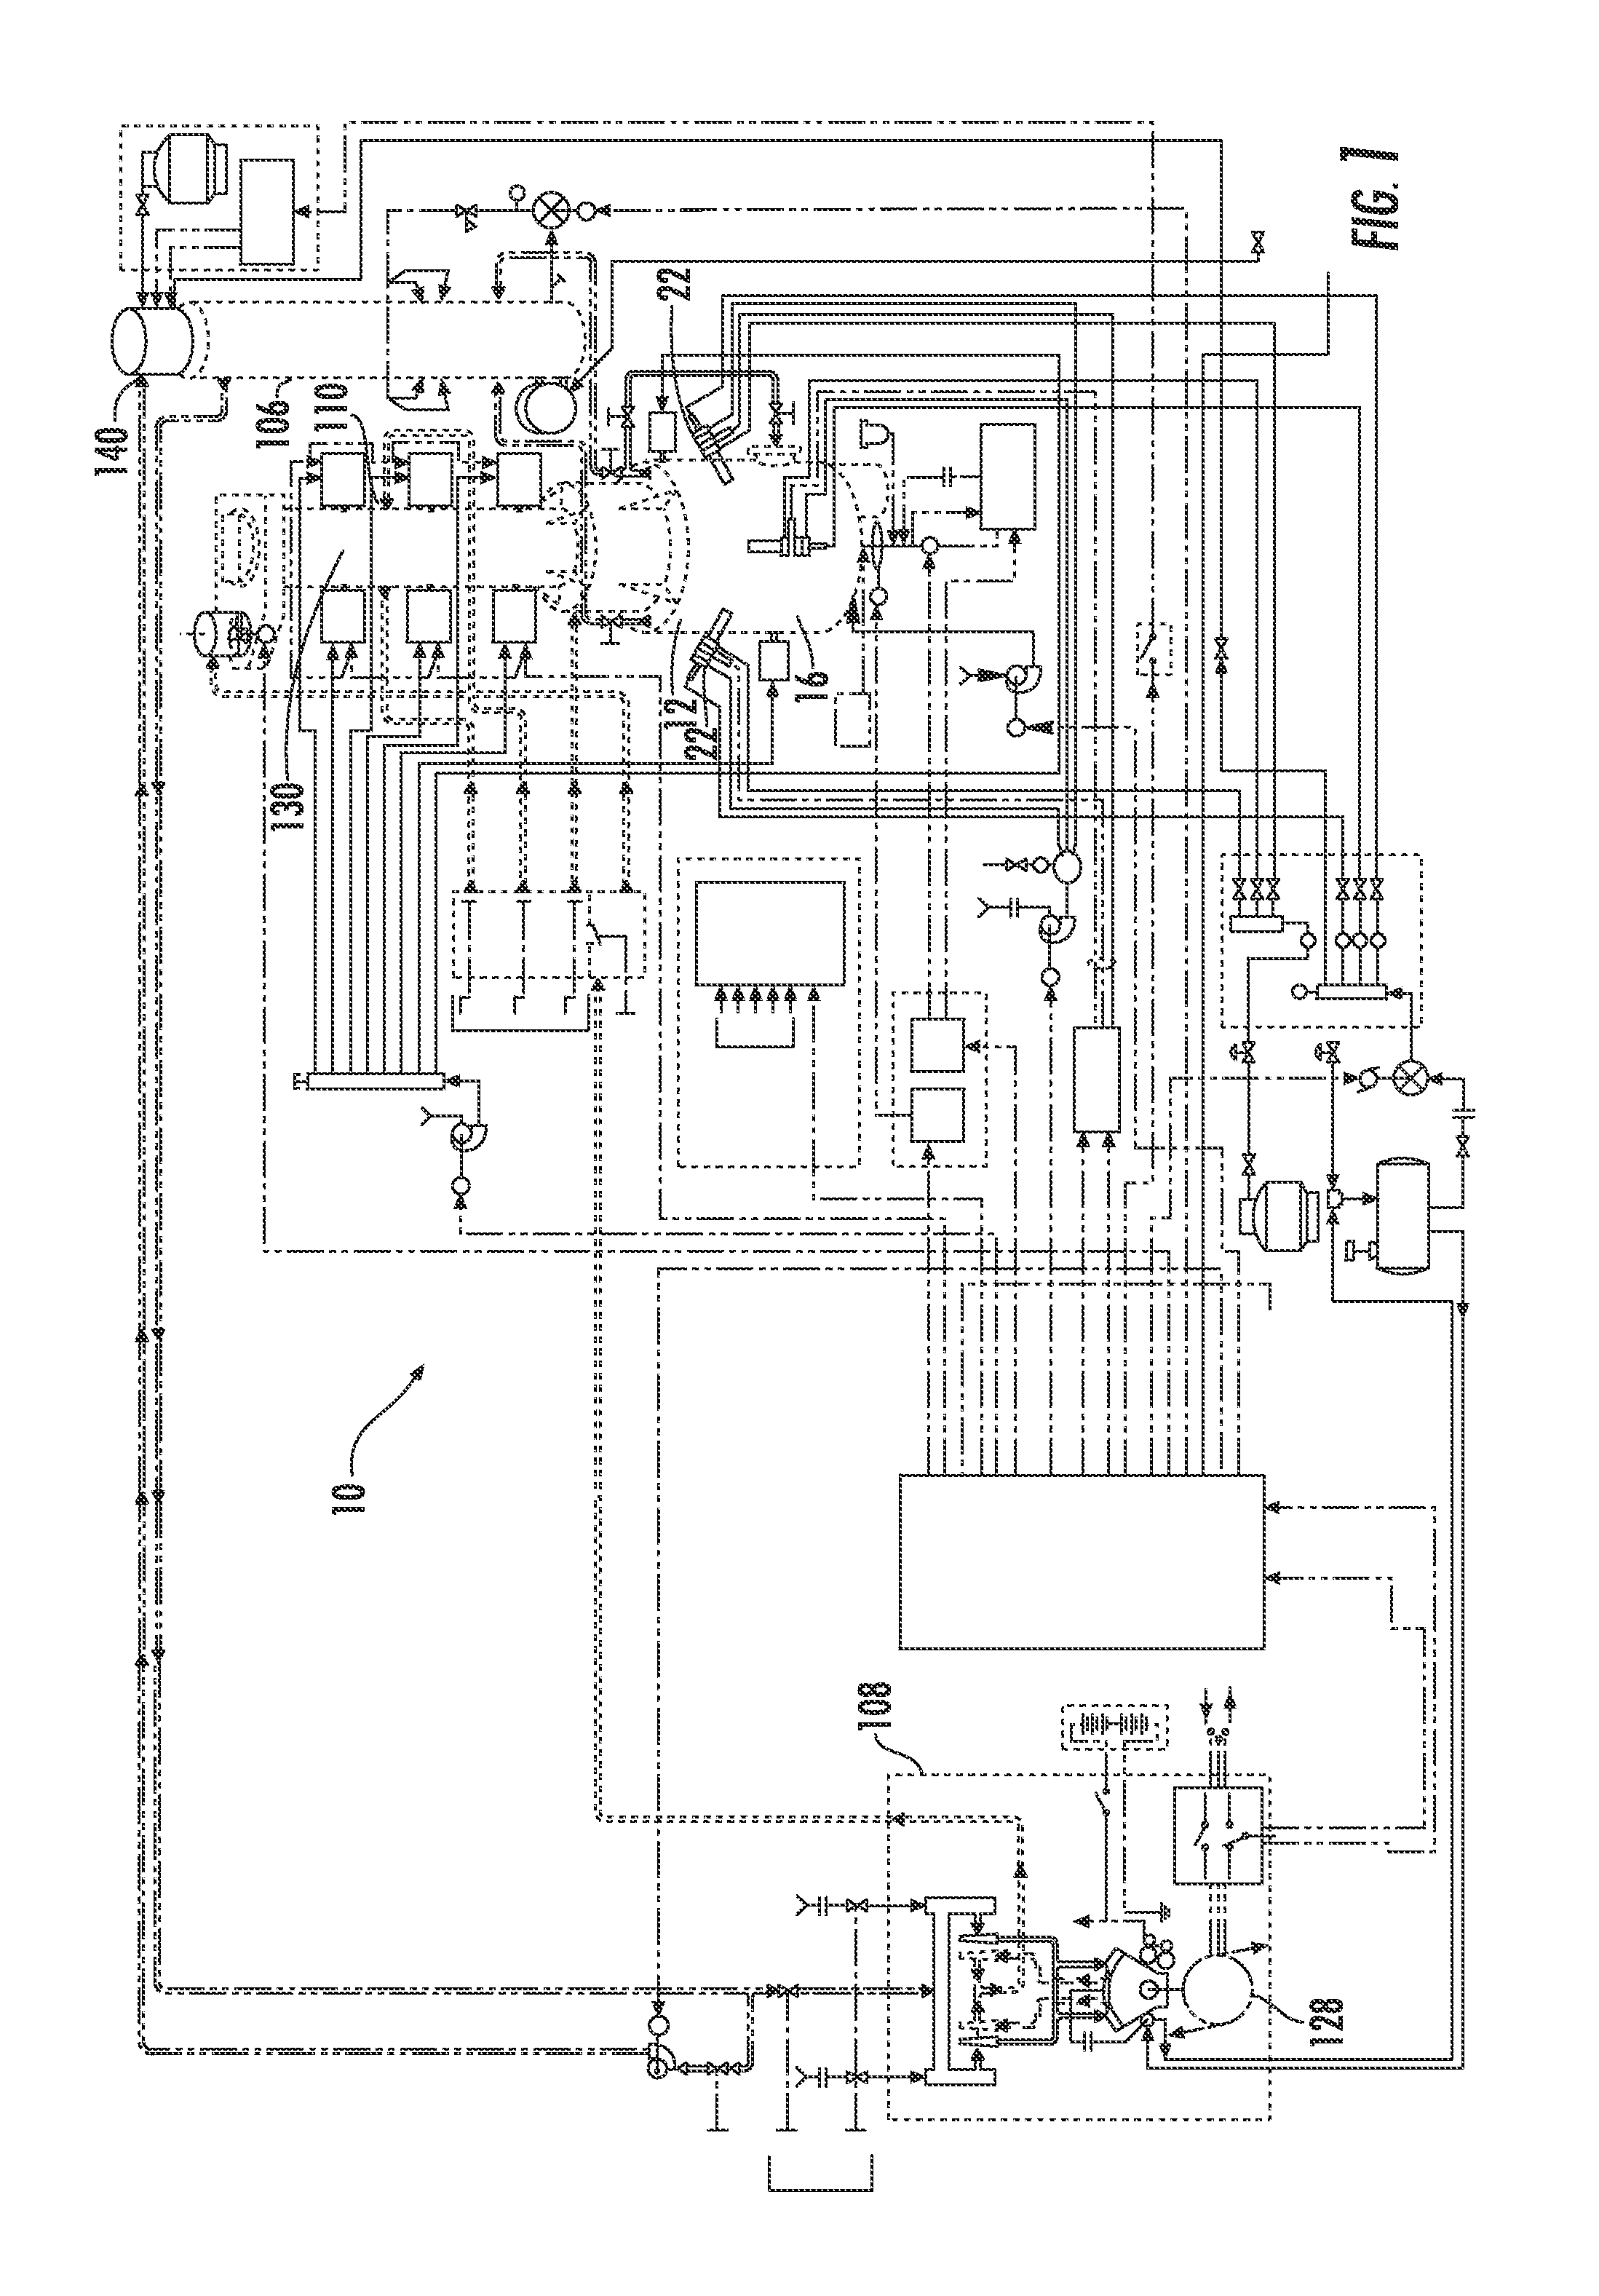 Plasma assisted gasification system with an indirect vacuum system